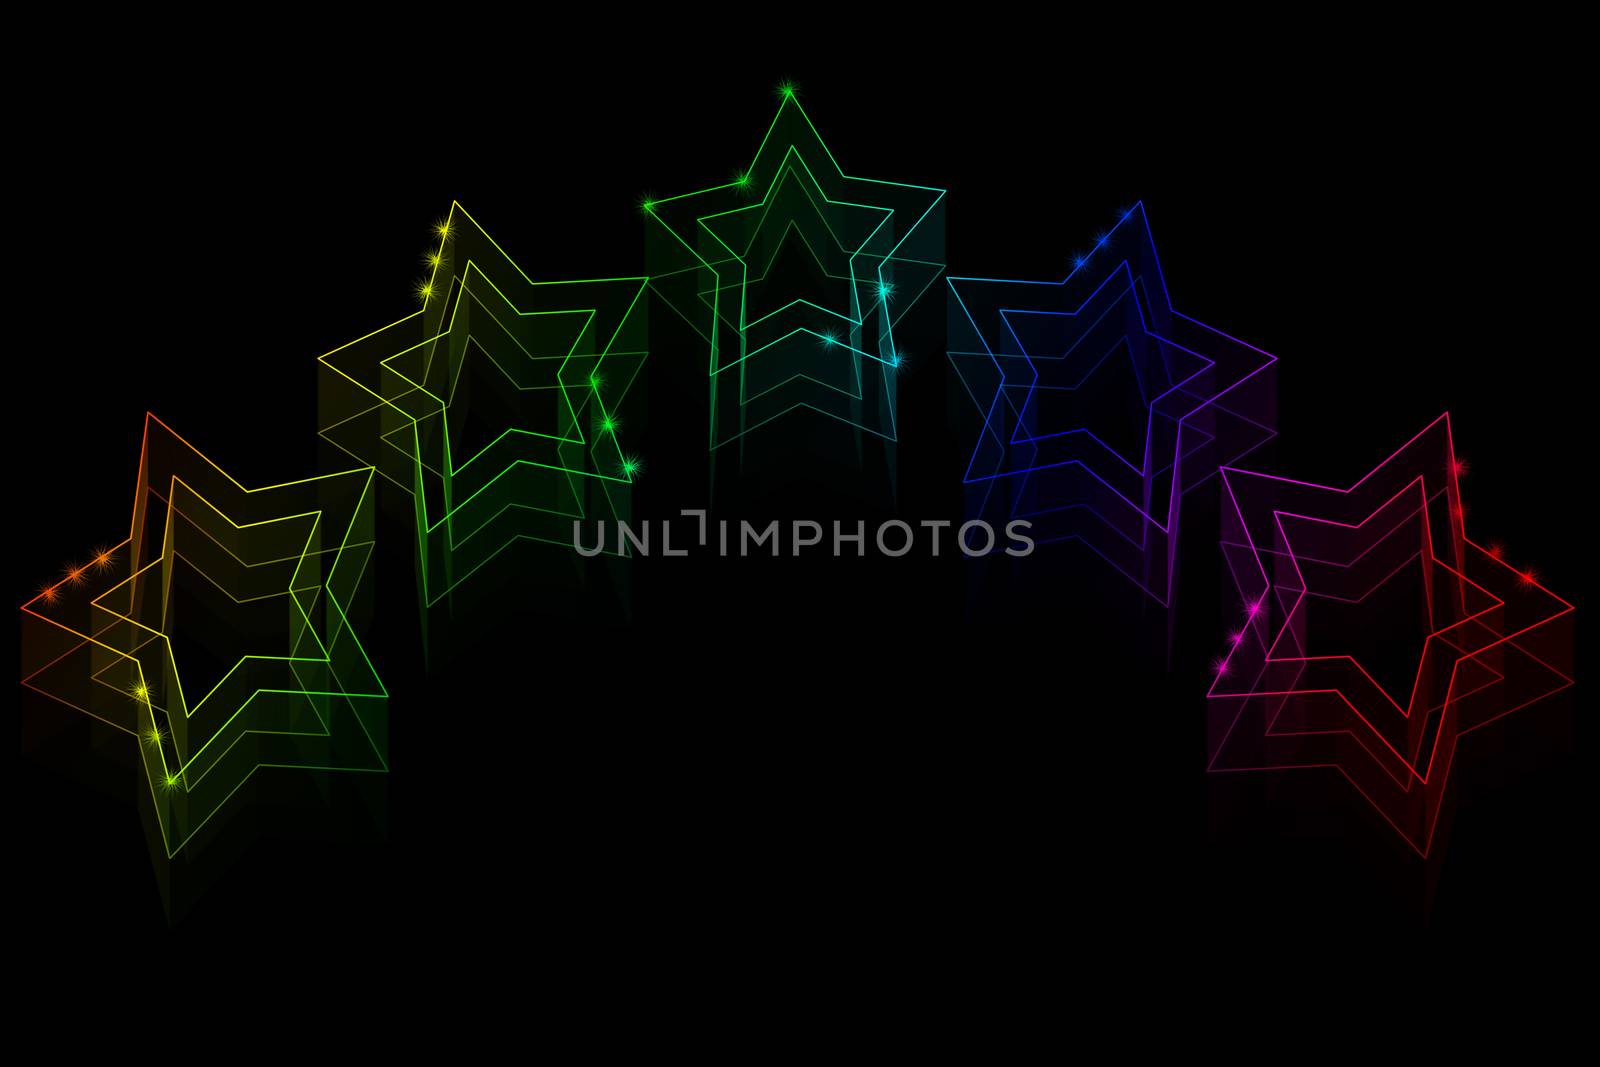 Lots of neon stars  by natali_brill